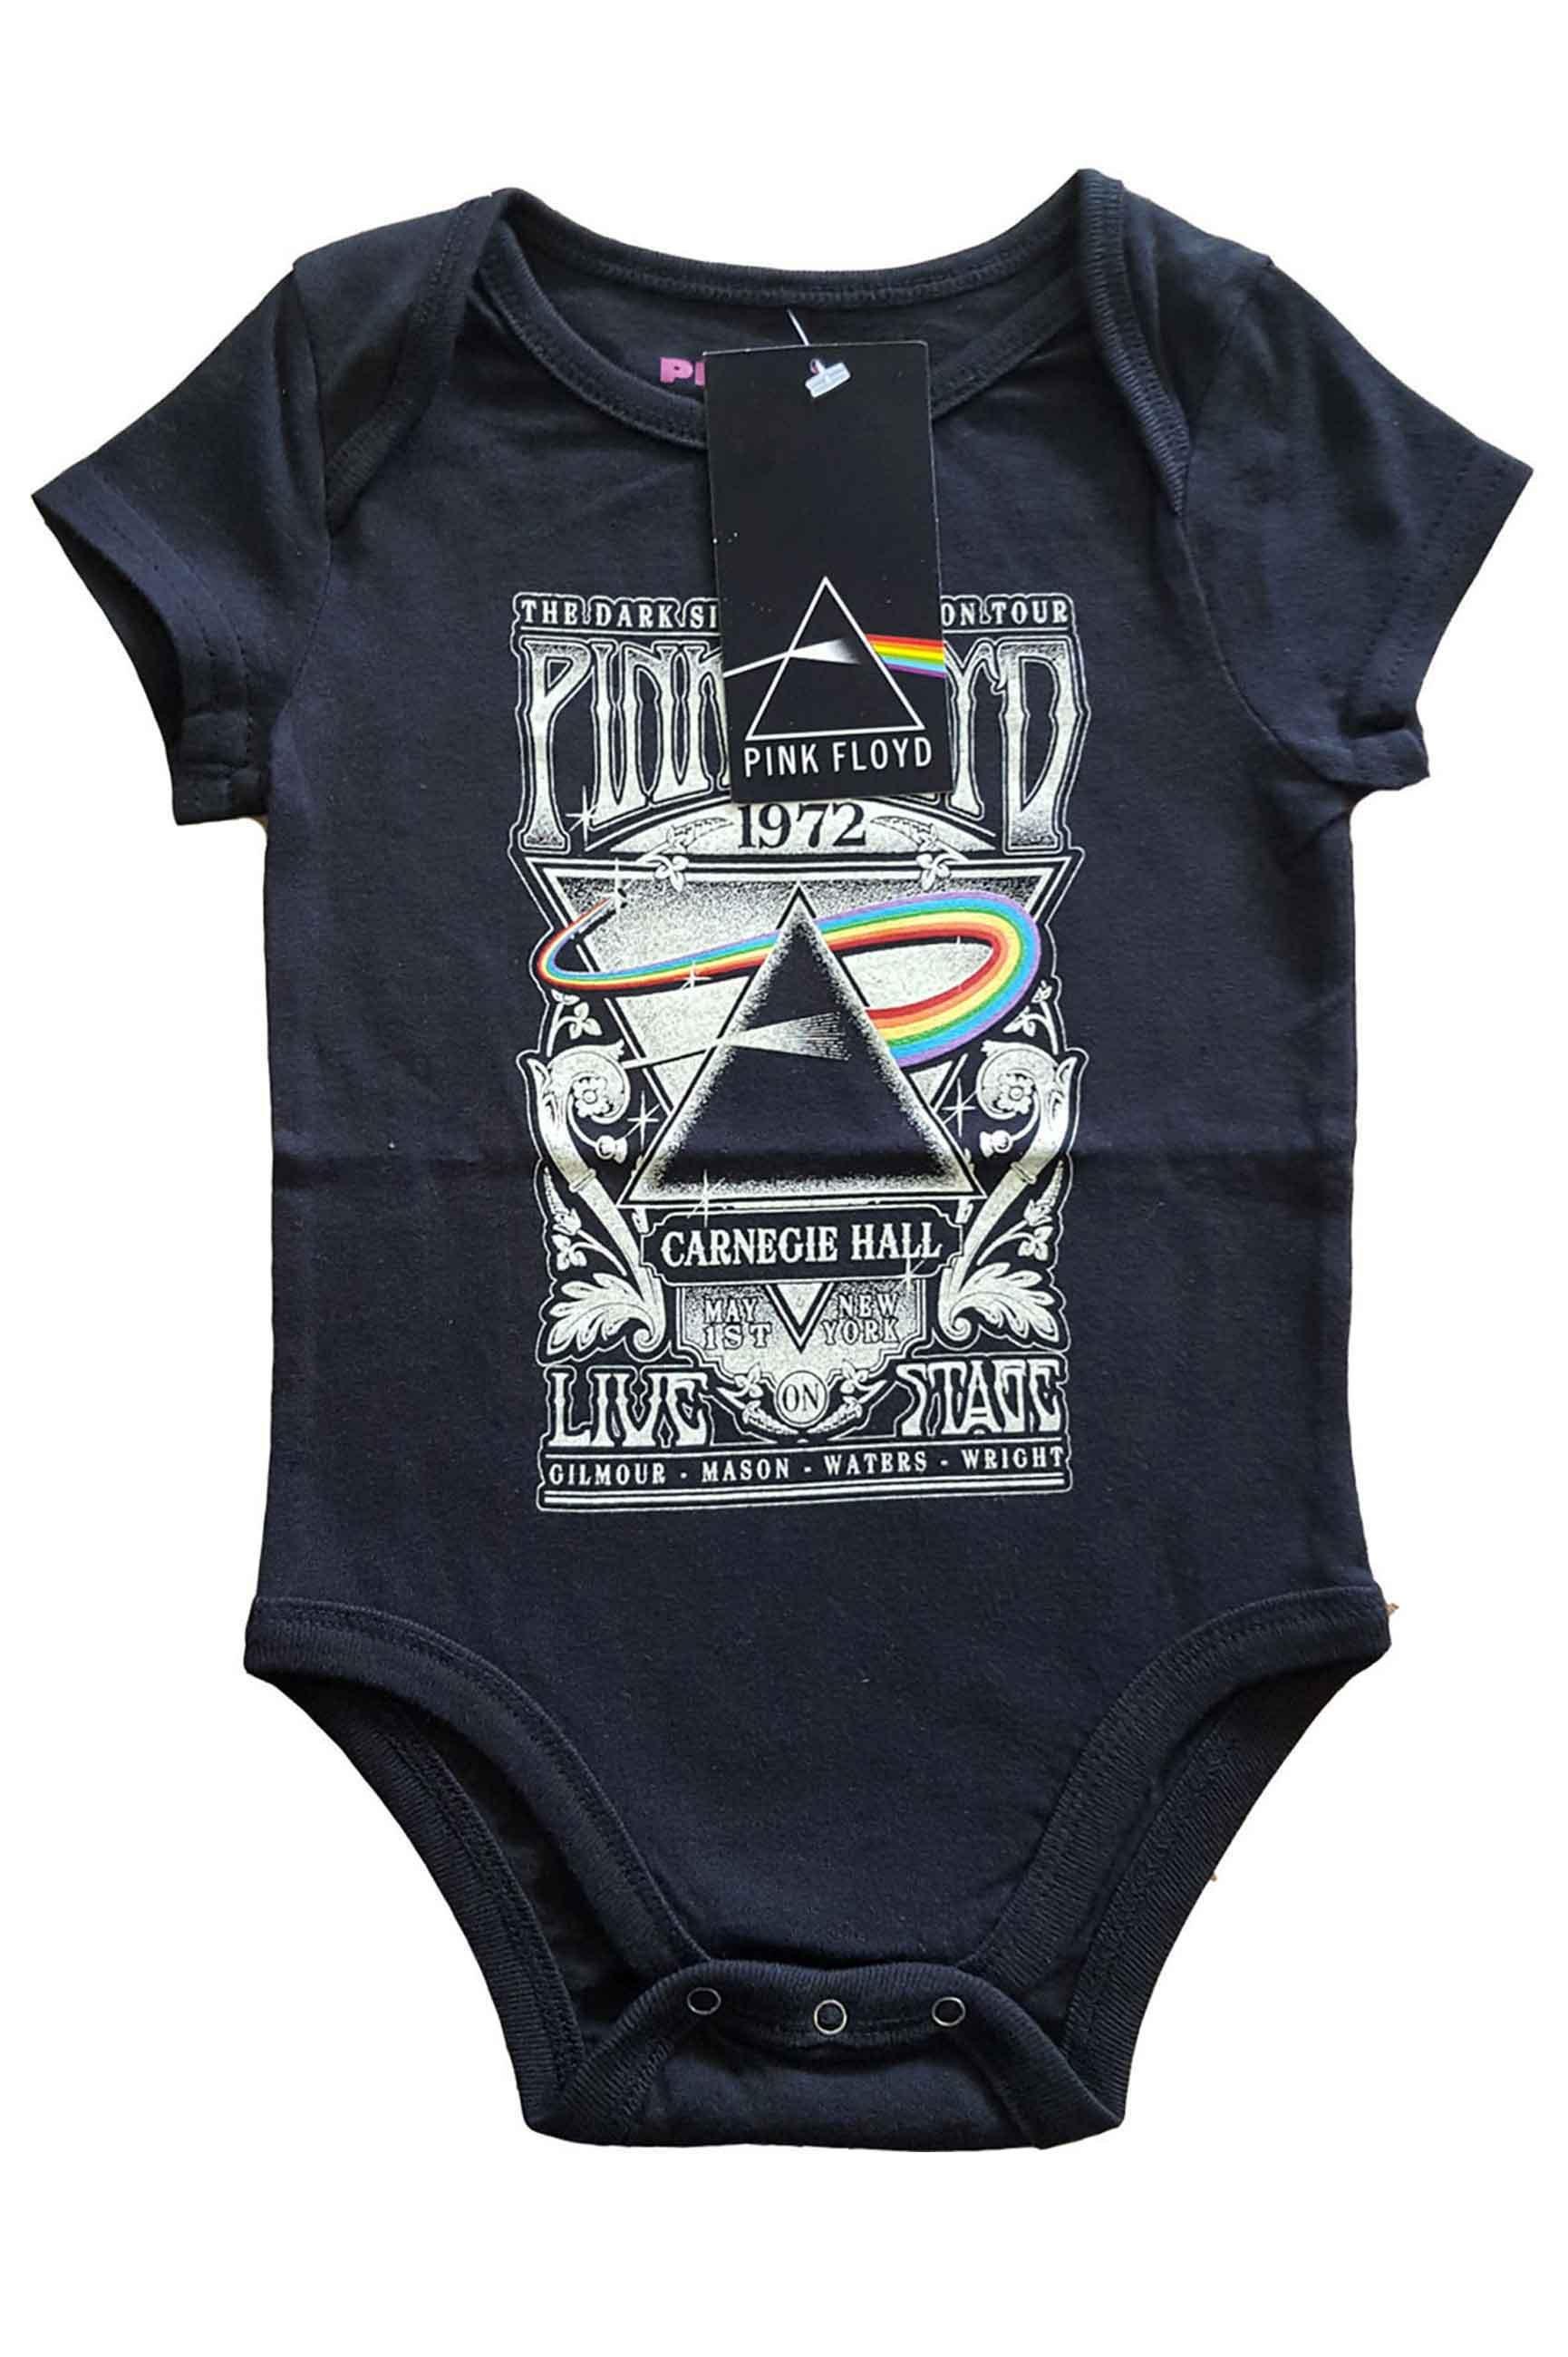 Carnegie Hall Poster Baby Grow